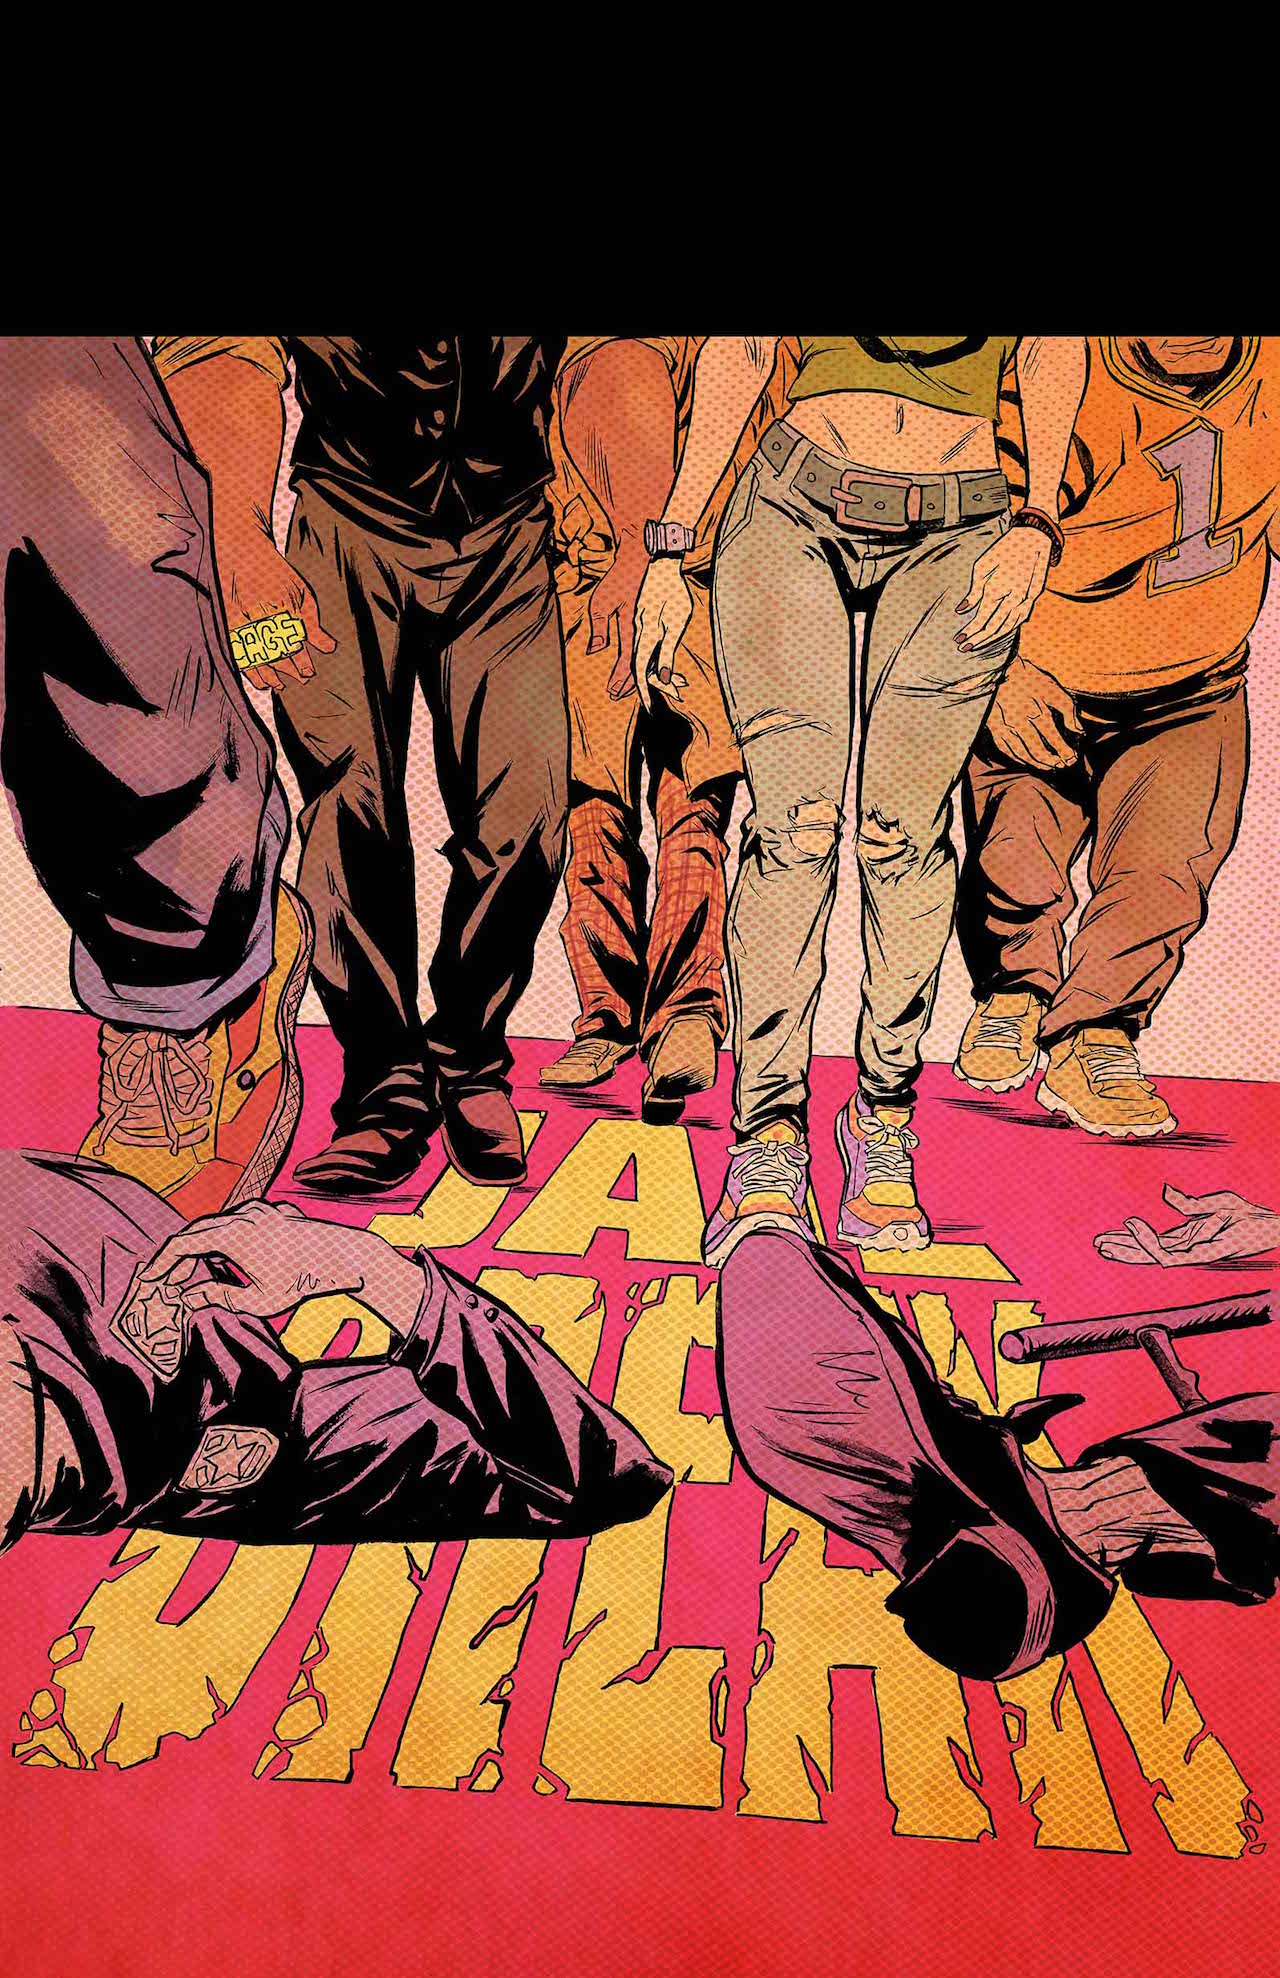 POWER MAN AND IRON FIST #8